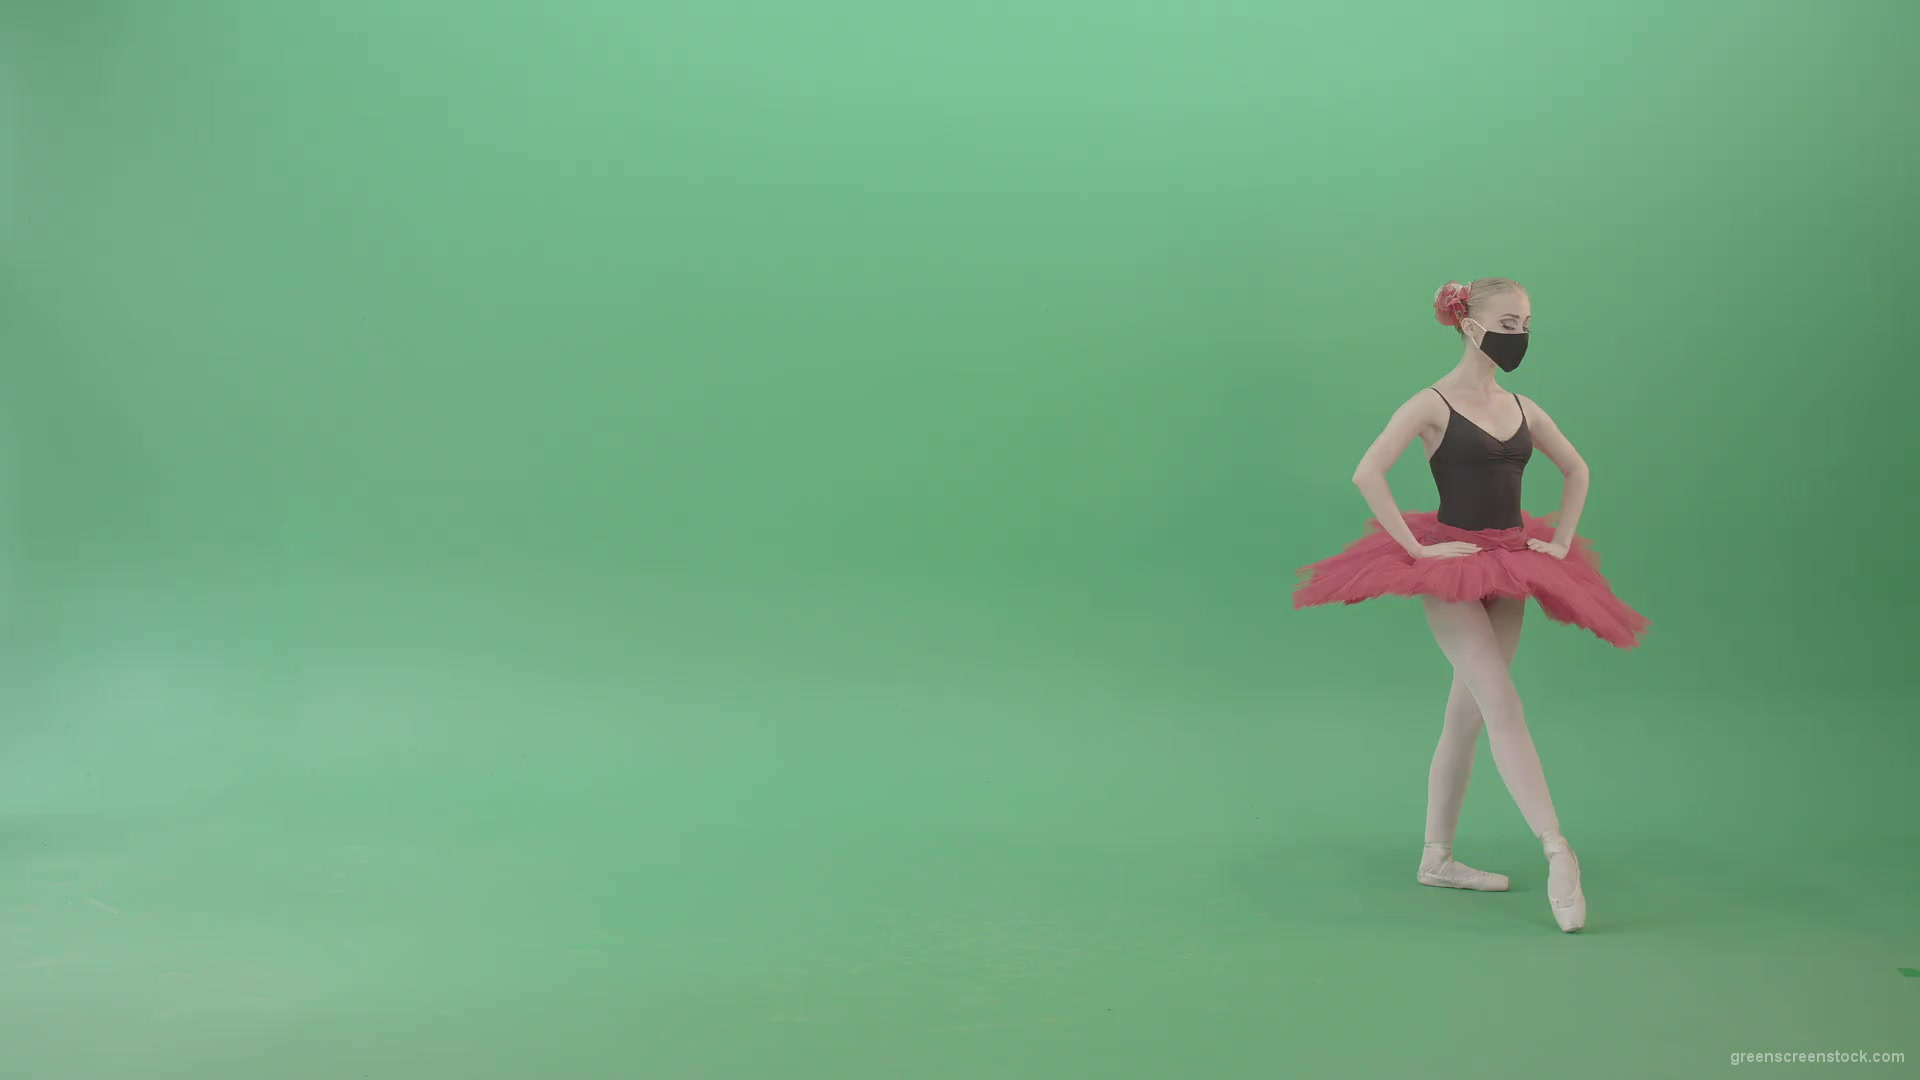 Tinny-Ballet-Dancing-Girl-Ballerina-in-red-black-dress-and-mask-welcome-people-for-awards-Green-Screen-Video-Footage-1920_001 Green Screen Stock